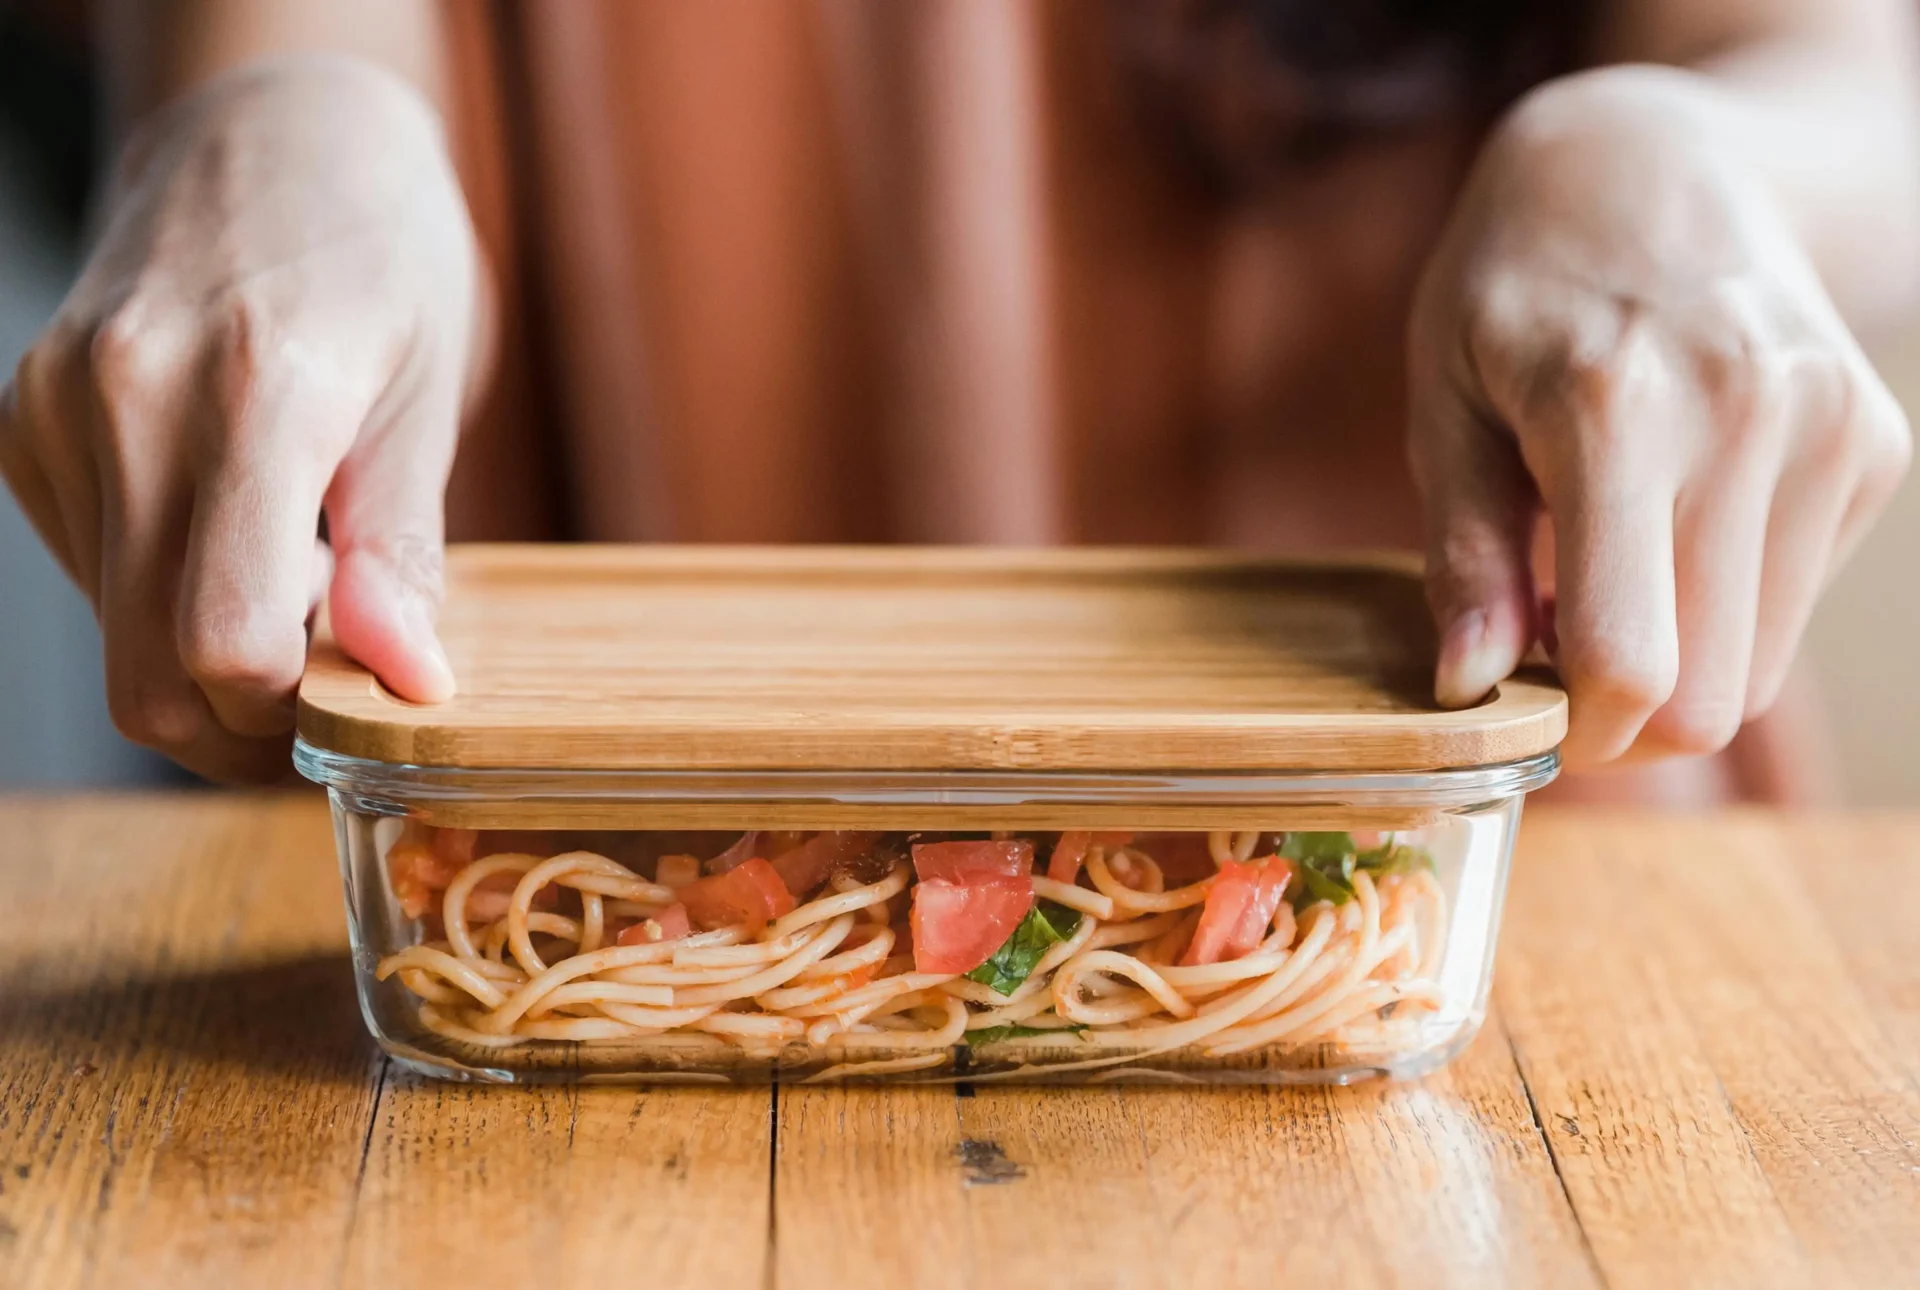 Tupperware Containers: Good or Bad?